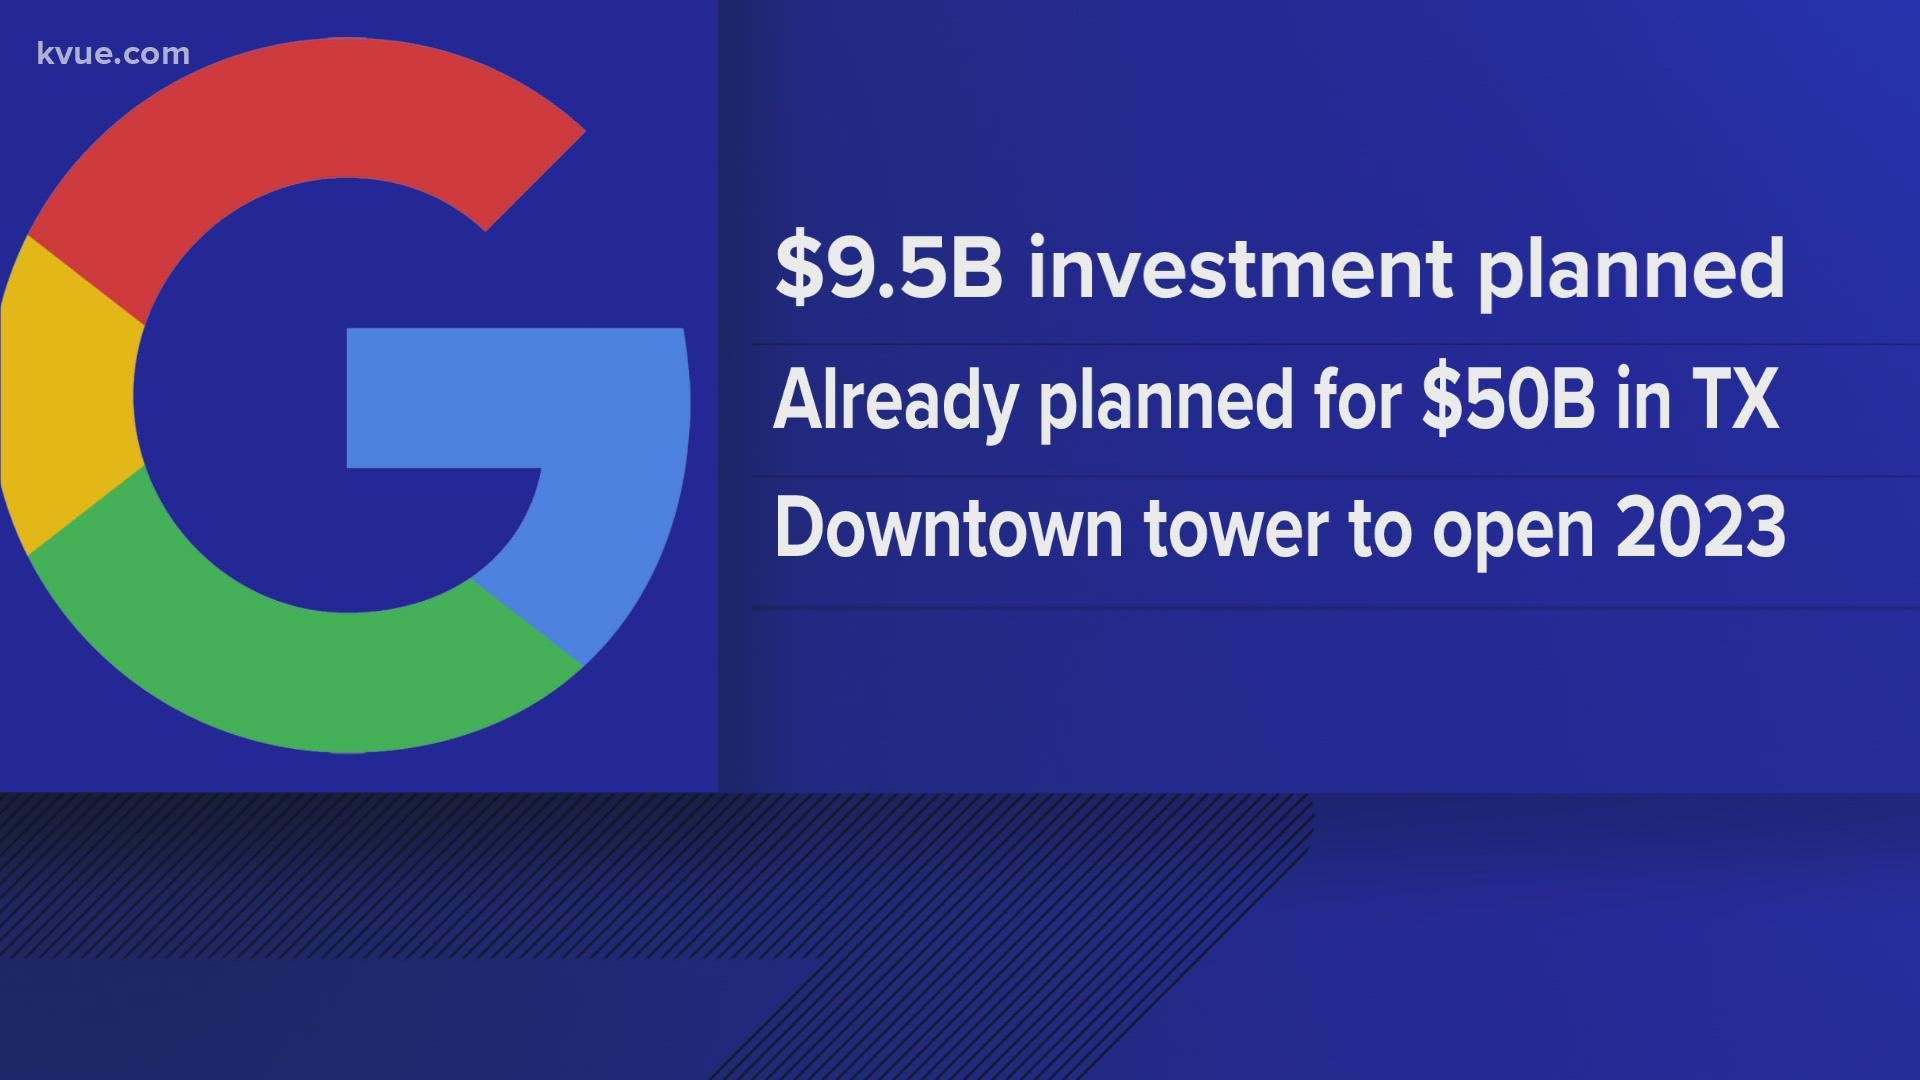 A Google blog post says the company has already invested over $37 billion over the last five years across 26 states. The tech giant also expects to add 12,000 jobs.